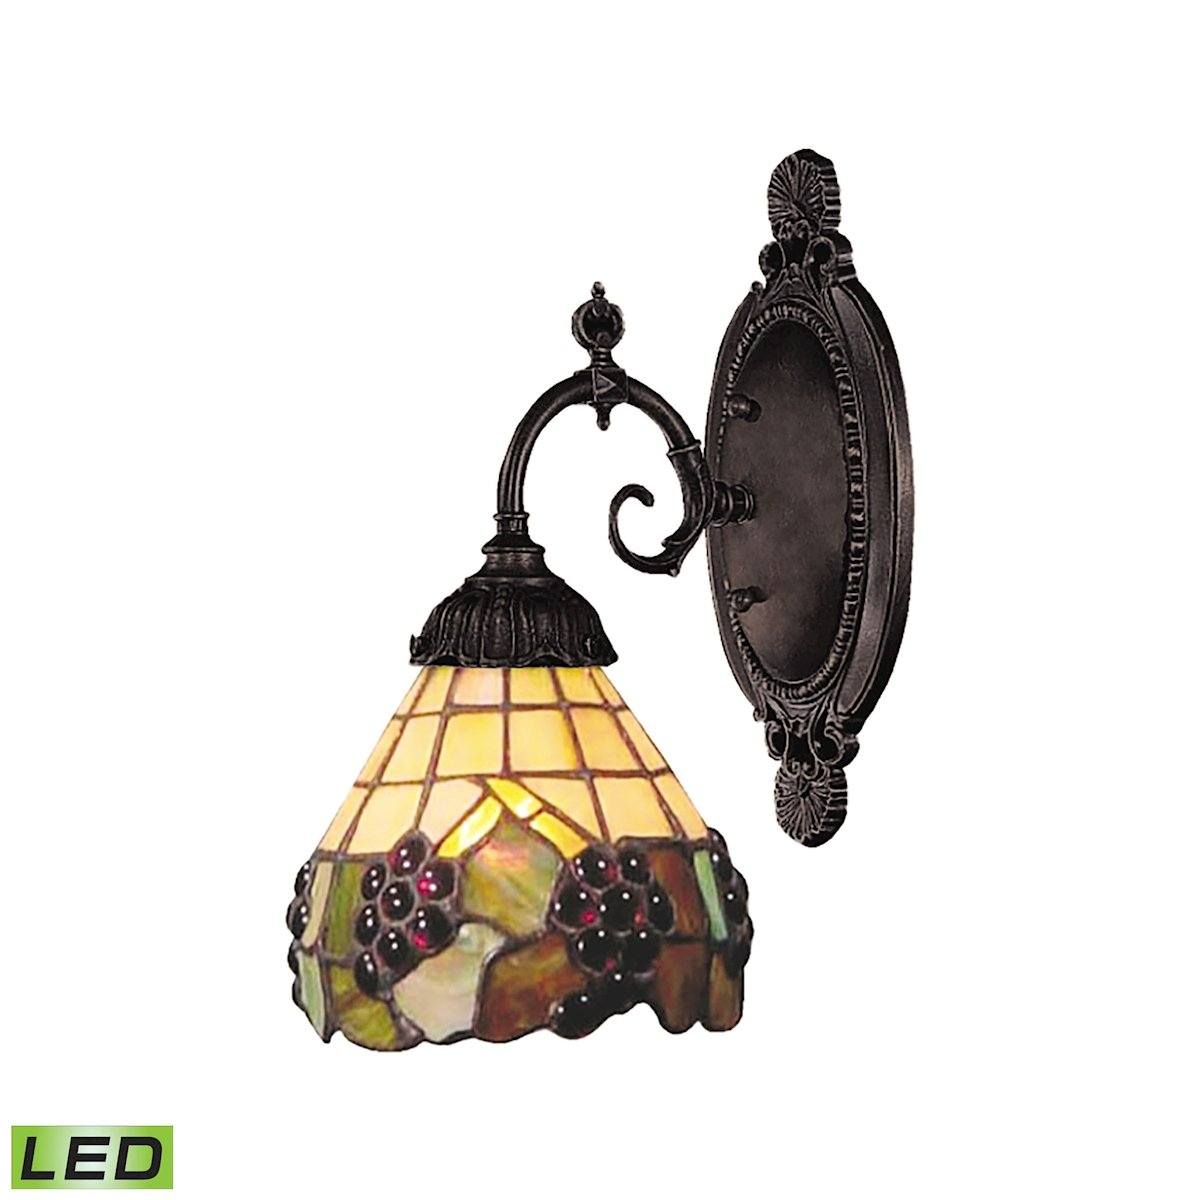 Mix-N-Match 1 Light LED Wall Sconce In Vintage Antique And Stained Glass Wall Sconce Elk Lighting 